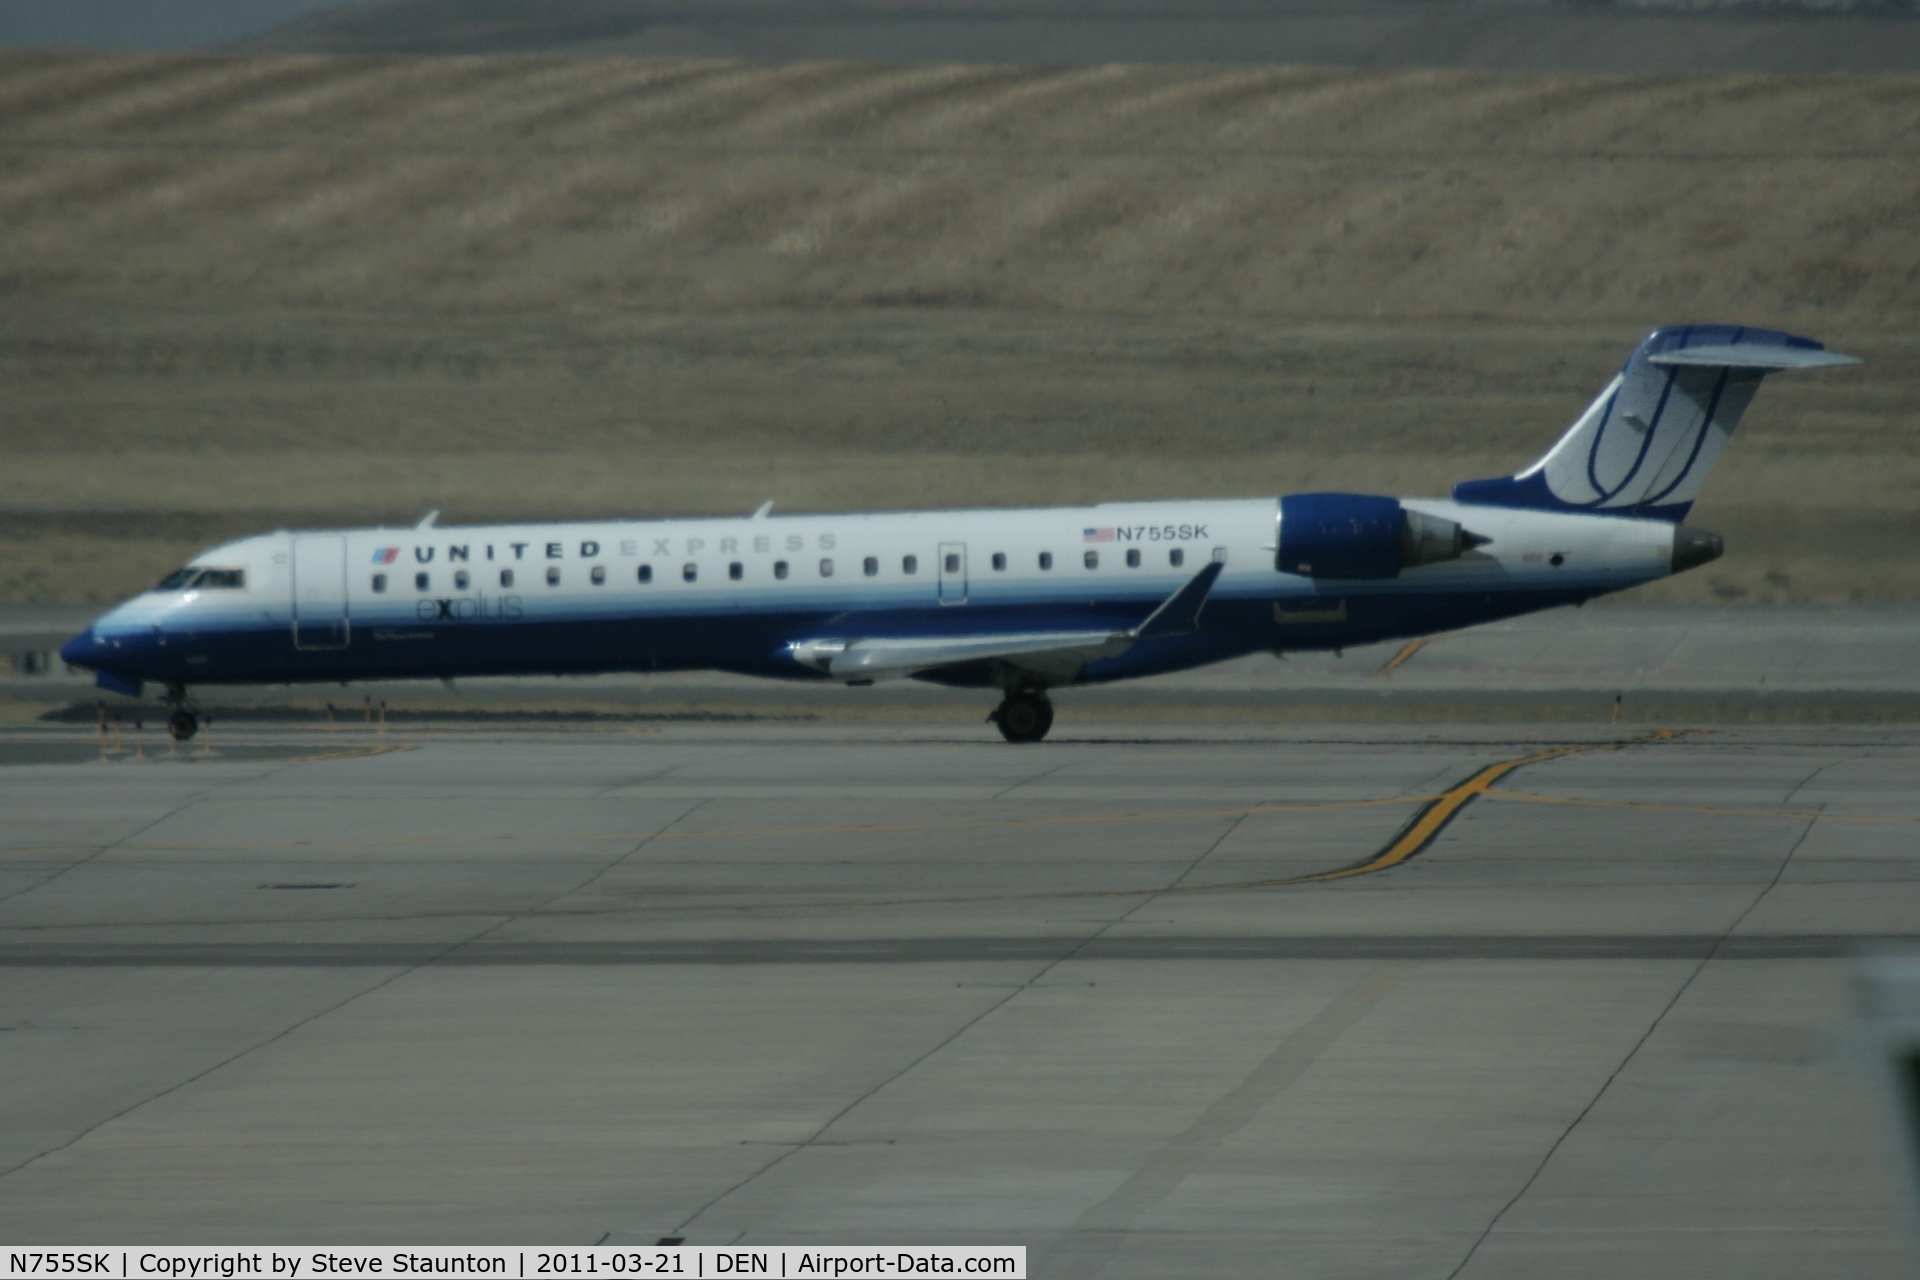 N755SK, 2005 Bombardier CRJ-700 (CL-600-2C10) Regional Jet C/N 10220, Taken at Denver International Airport, in March 2011 whilst on an Aeroprint Aviation tour